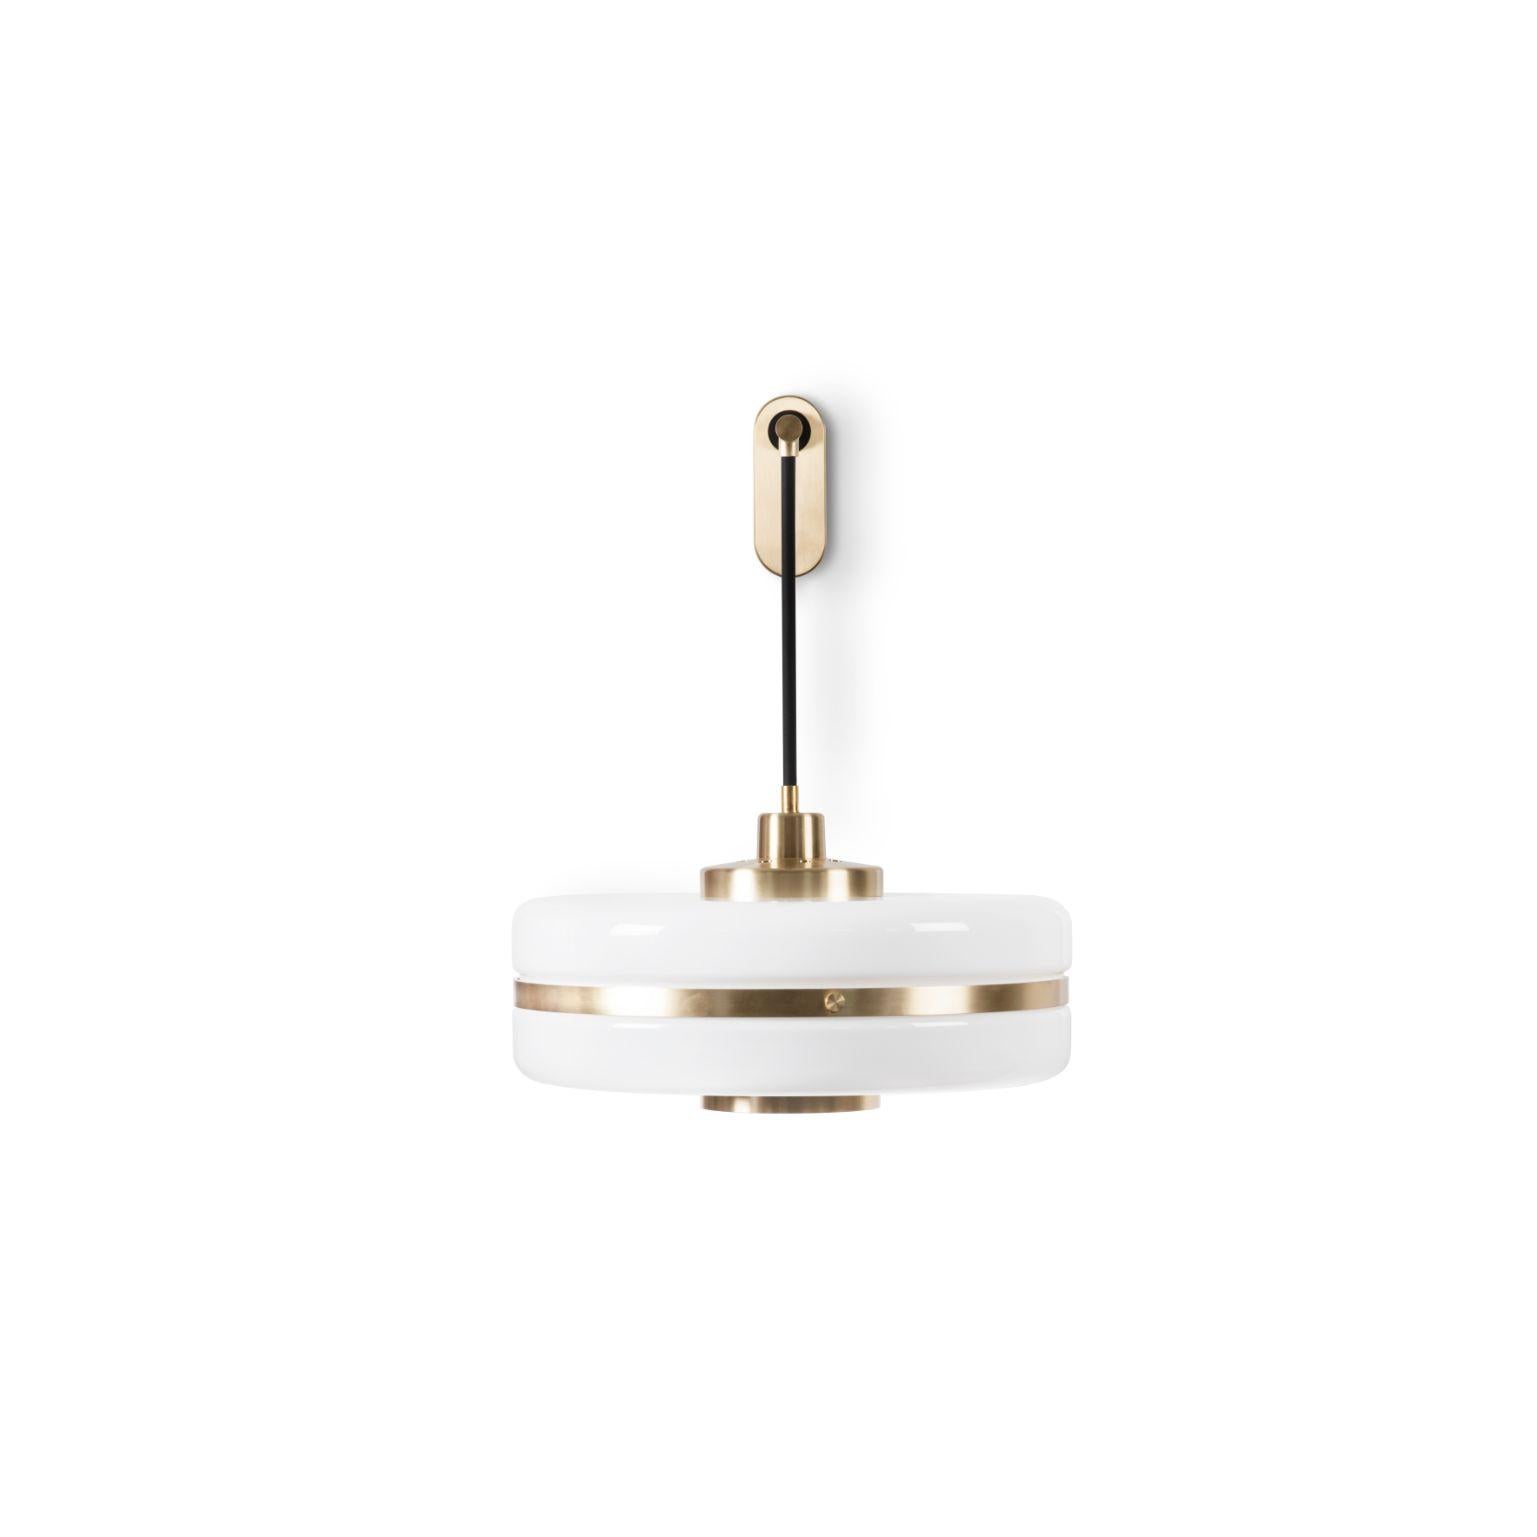 Masina wall light by Bert Frank
Dimensions: 53.5 x 56.4 x 40 cm
Materials: Brass, glass

When Adam Yeats and Robbie Llewellyn founded Bert Frank in 2013 it was a meeting of minds and the start of a collaborative creative partnership with engineering